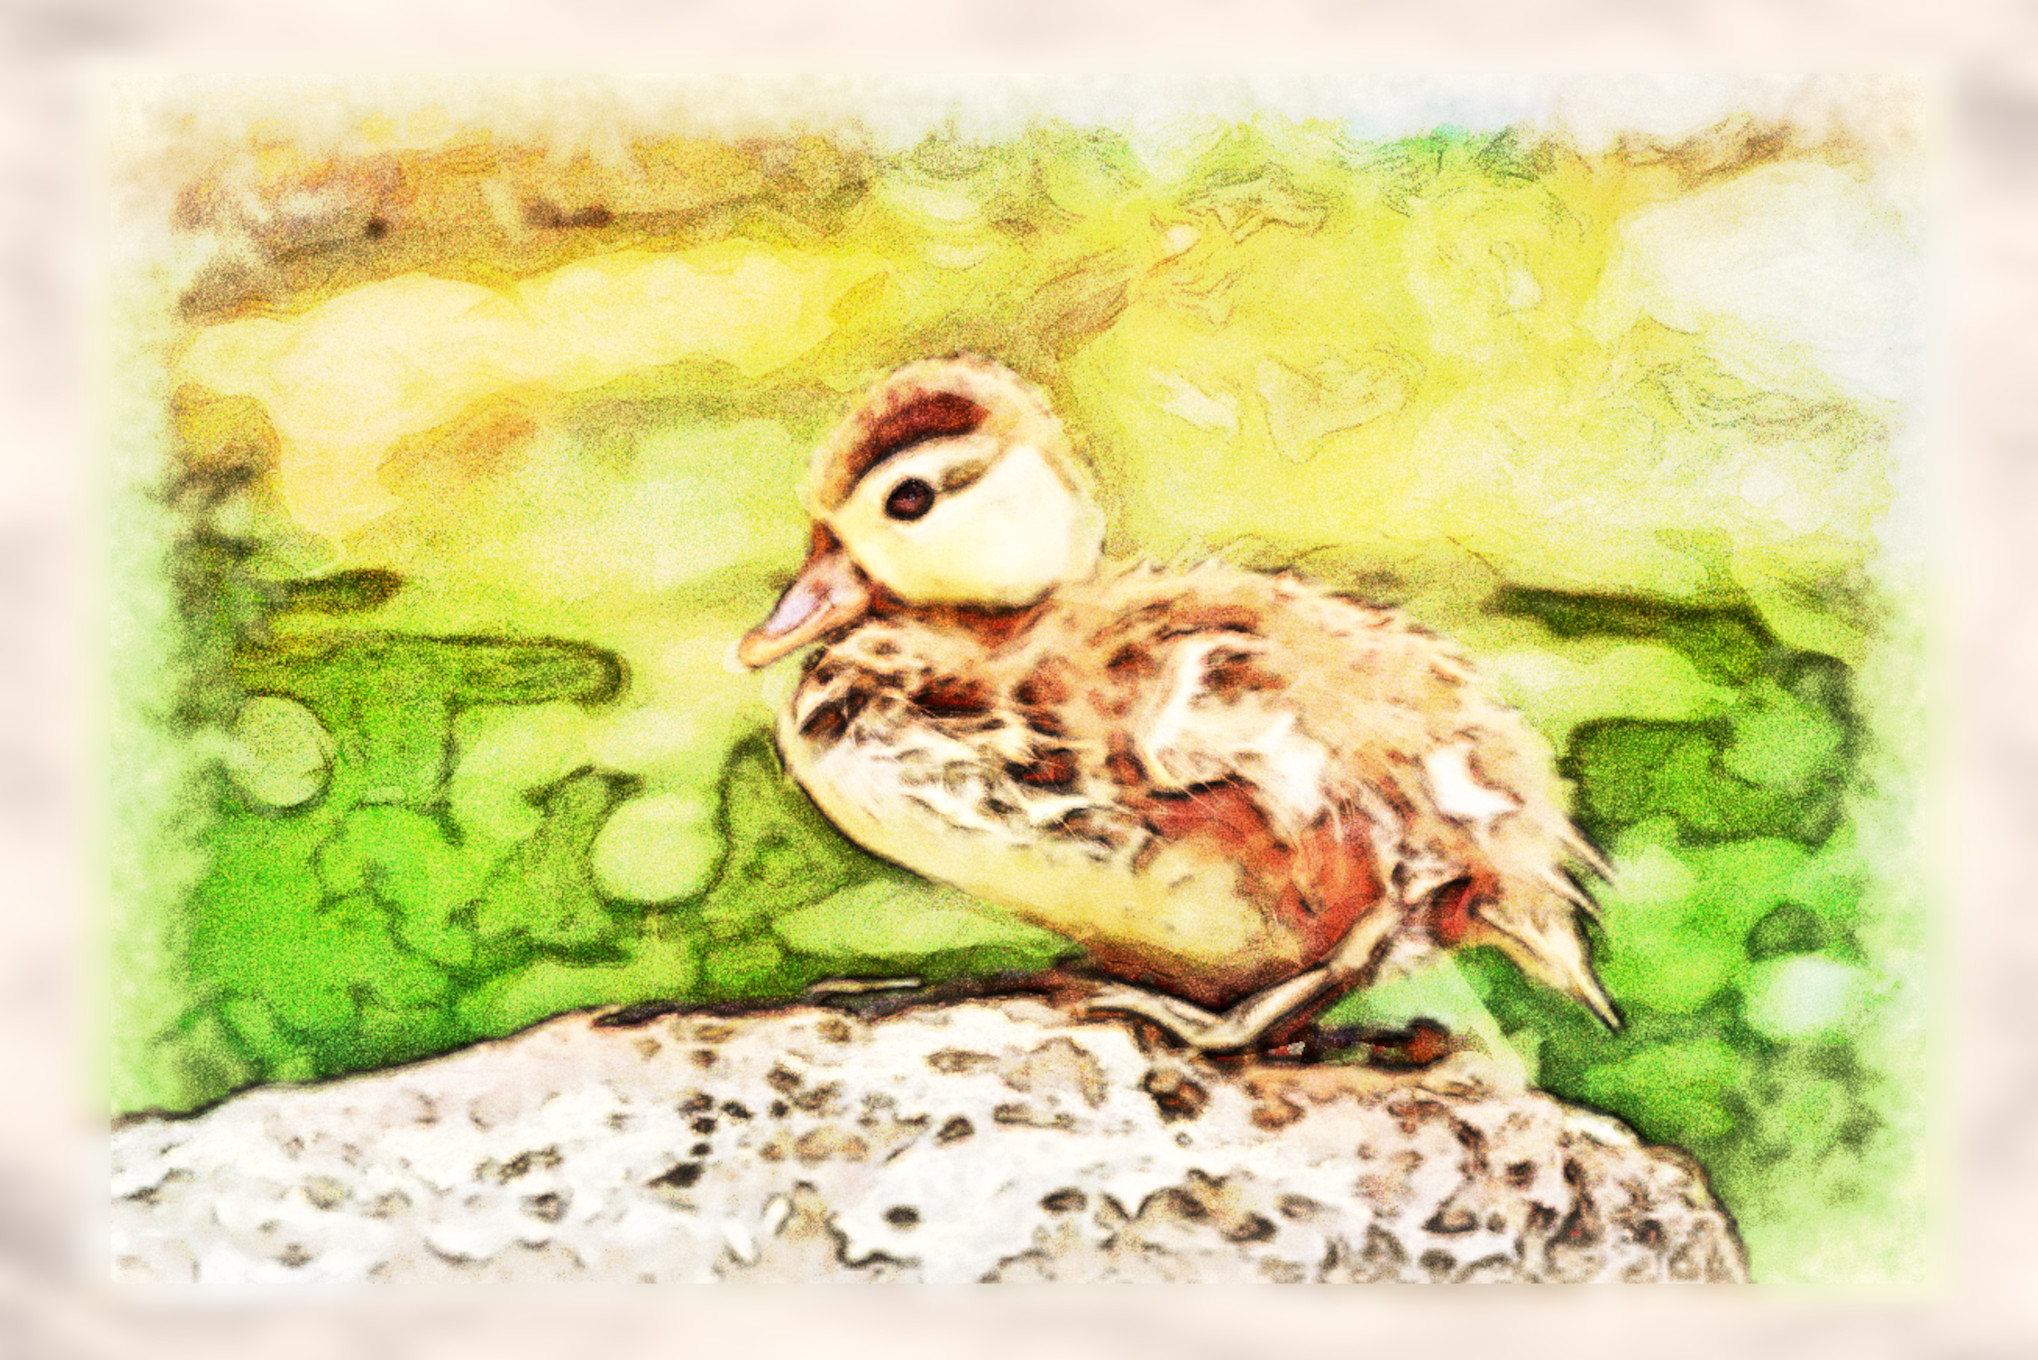 2023-09-30 18-31-13 duckling-8062337 with a Watercolor Pastels Effect 2023 (4.0,75.0,20.0,30.0,20.0,9.0,80.0,True,0).jpg